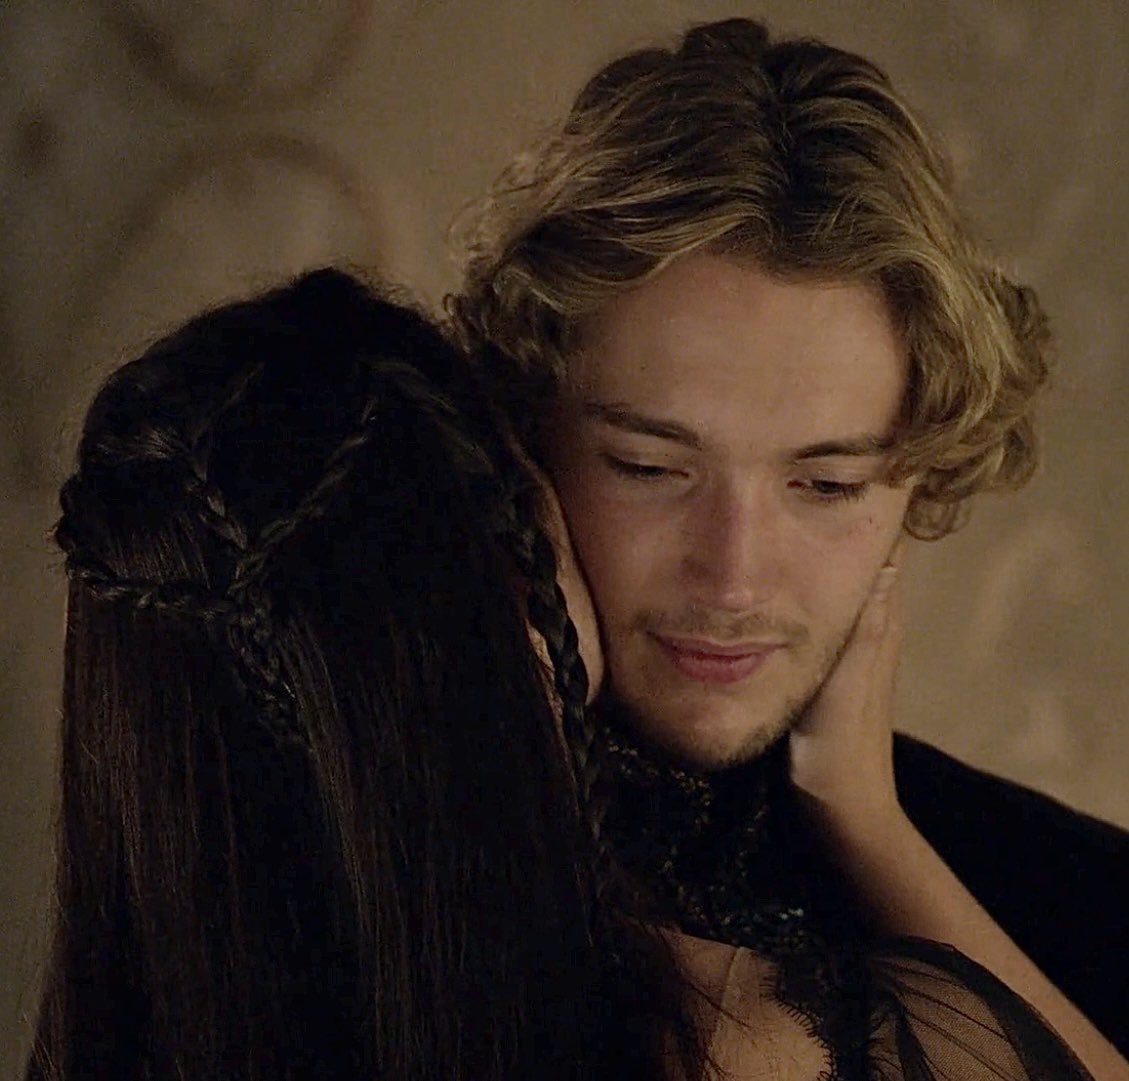 These are sweet loving Mary’s gestures will end the week with these images.
Happy Frary ❤️❤️Friday!